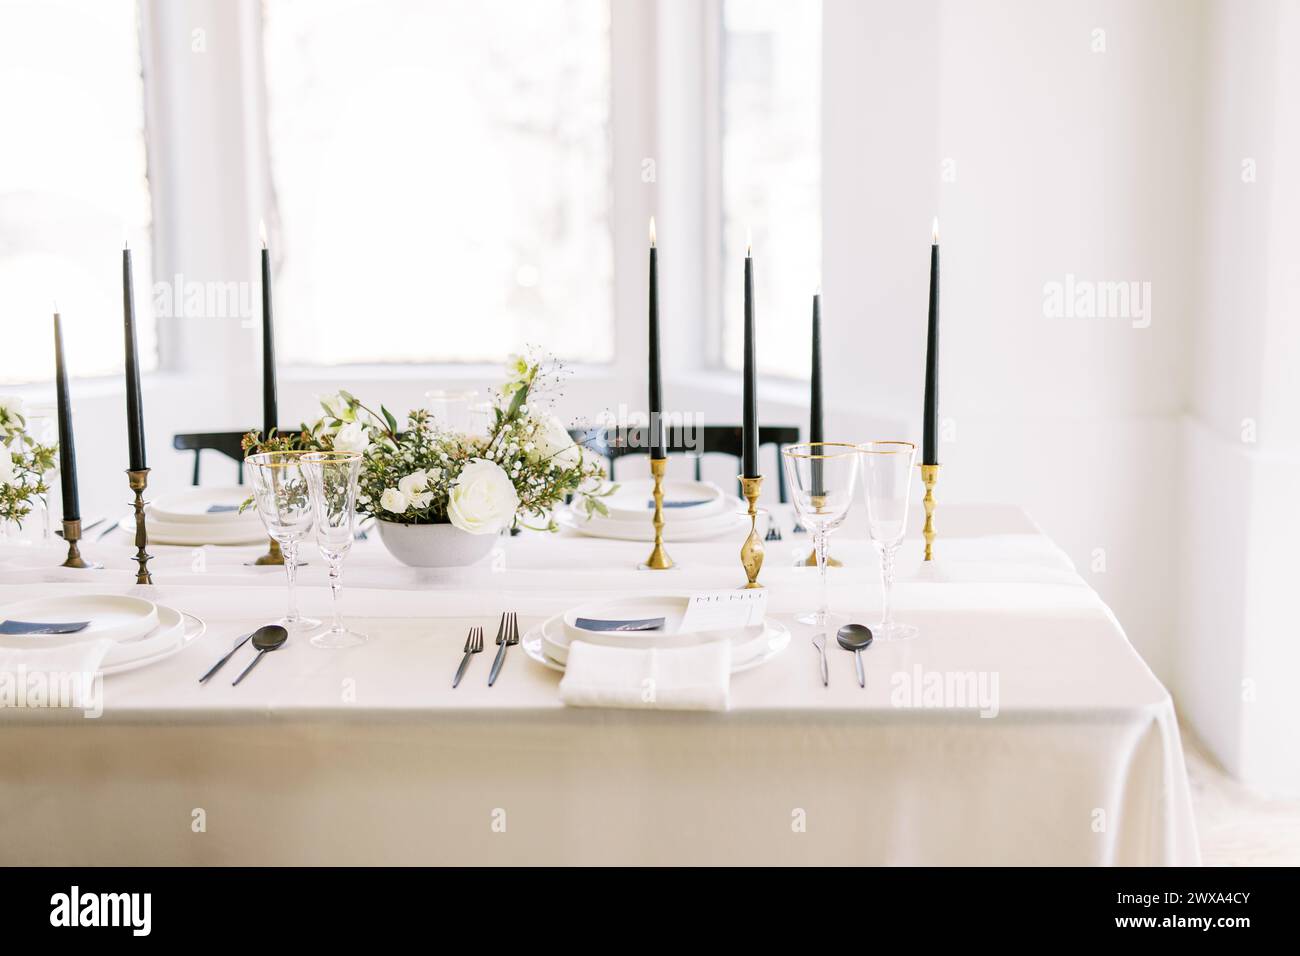 Elegant wedding table setting with floral centerpiece Stock Photo